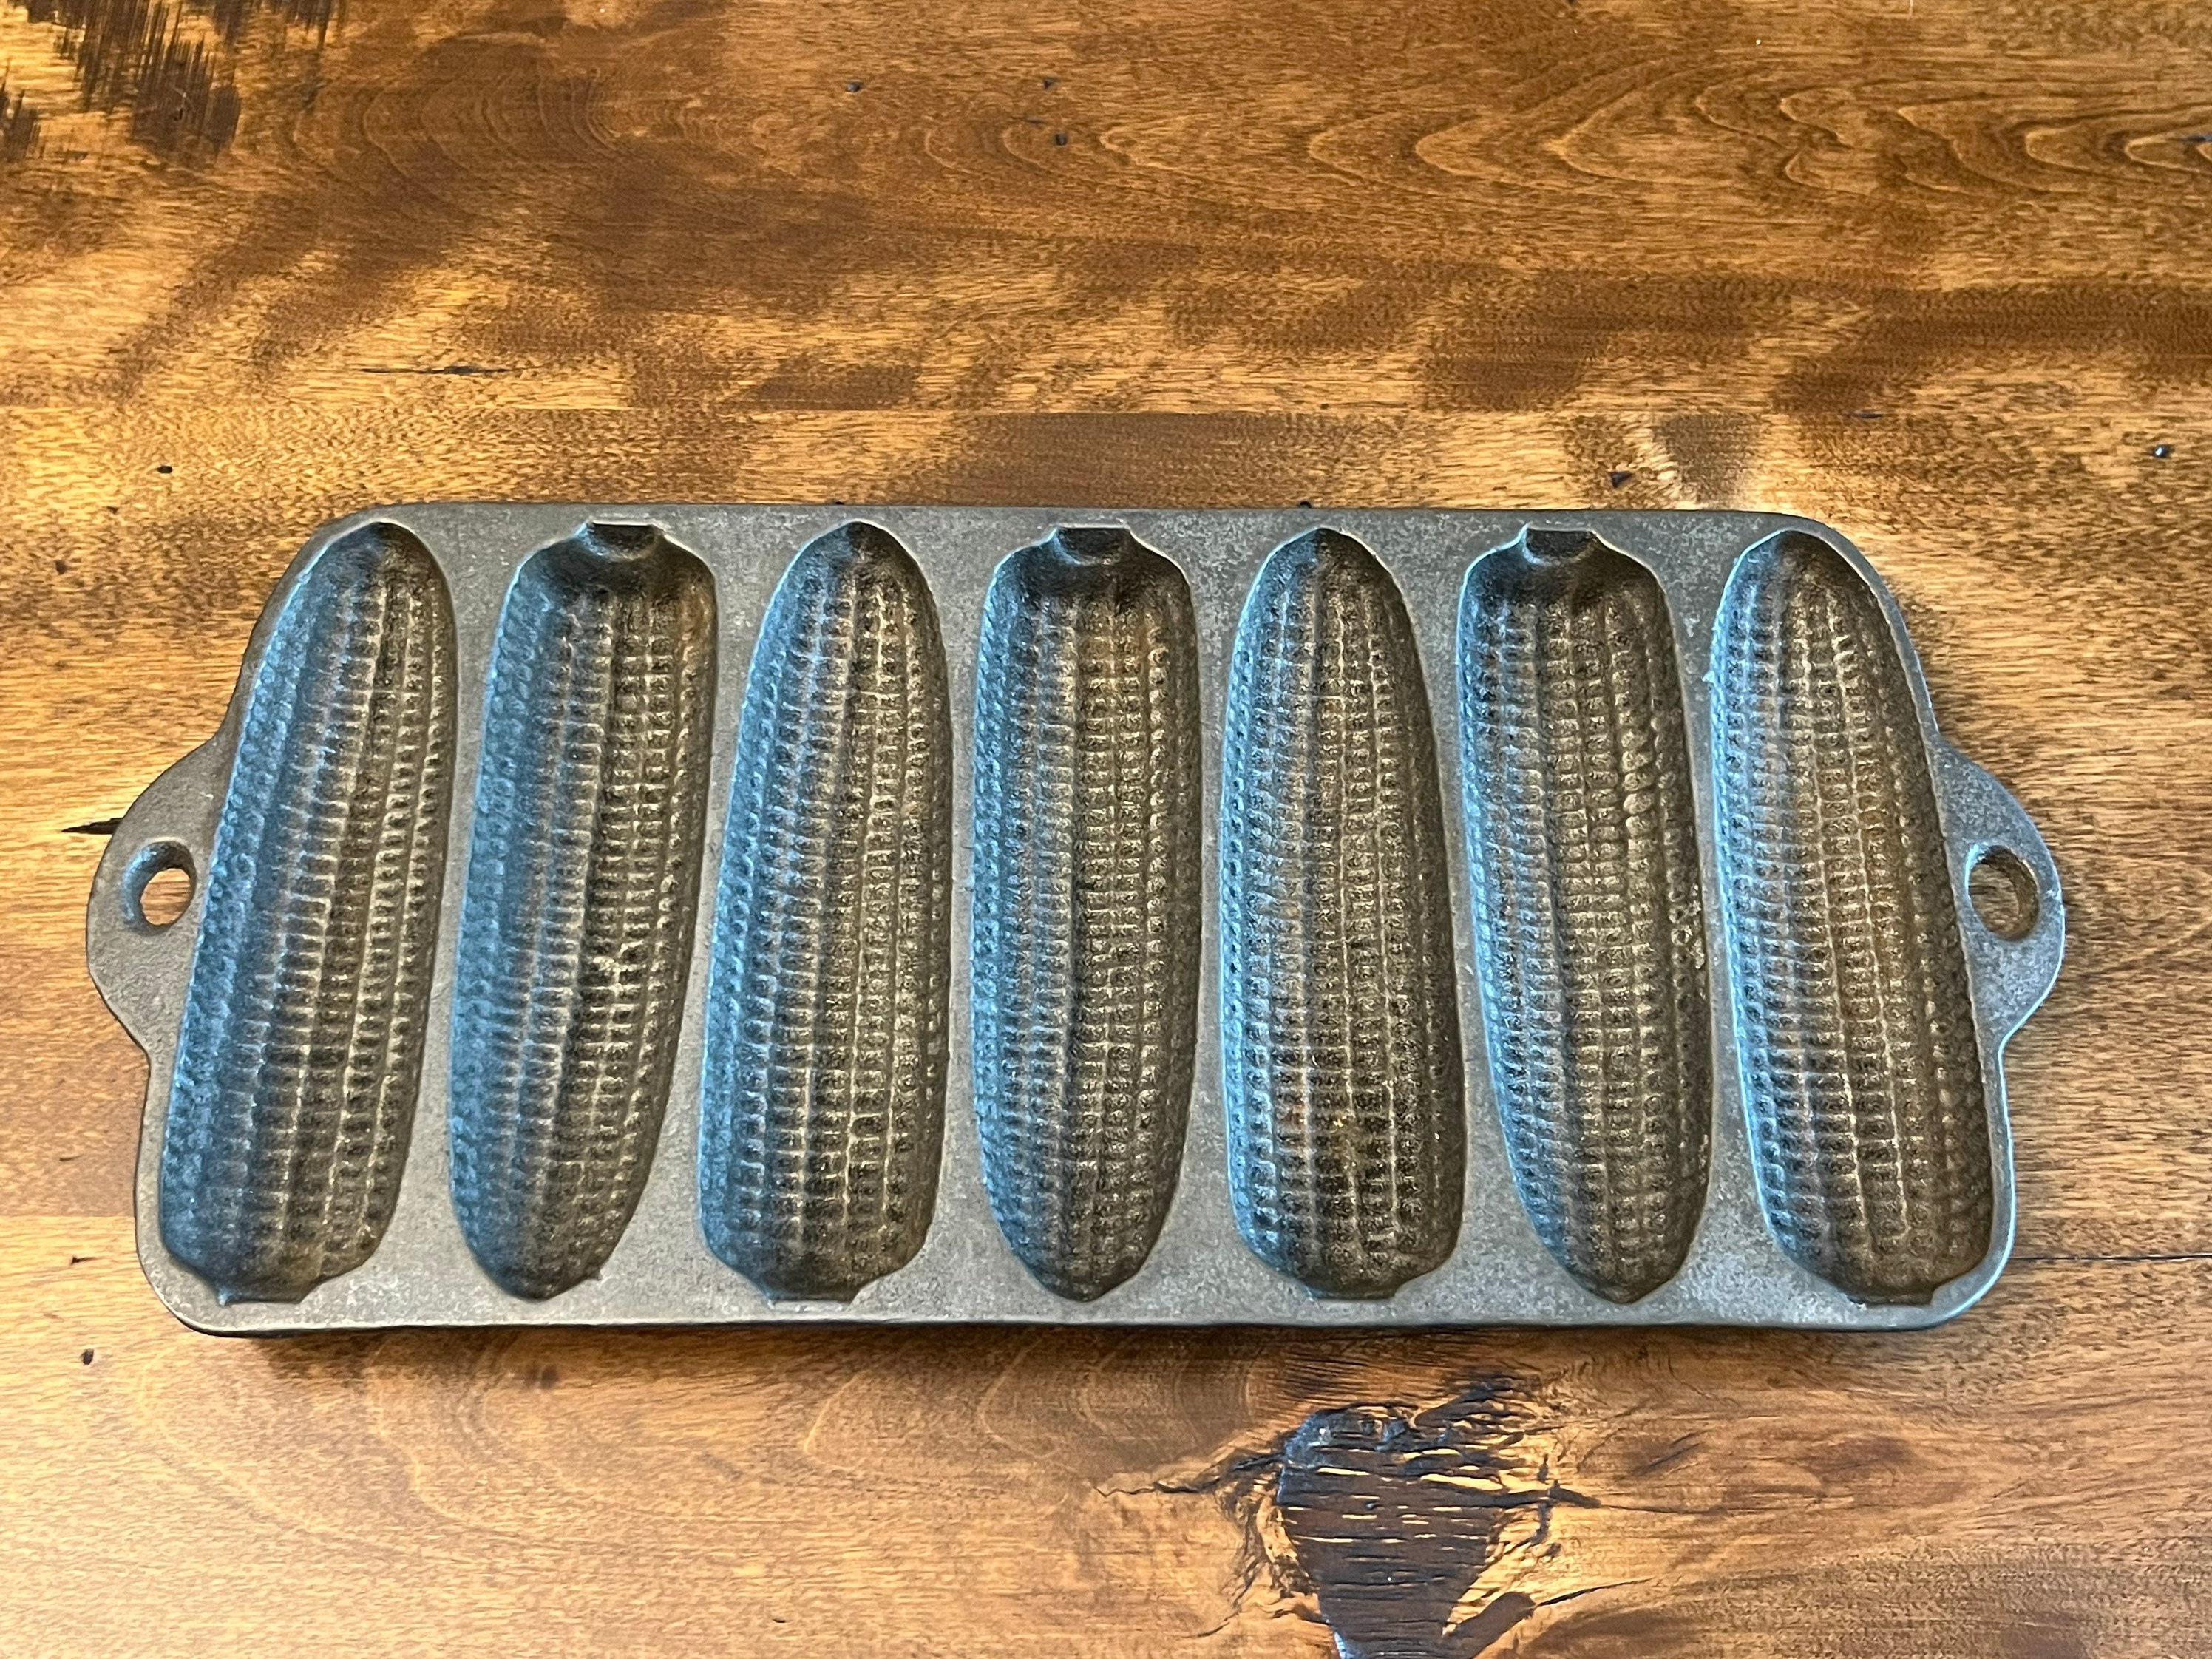 Vintage Silver Cast Iron Corn Molds Cornbread Pan. Two Holes for Hanging.  Great for Vintage or Antique Kitchen Display. 